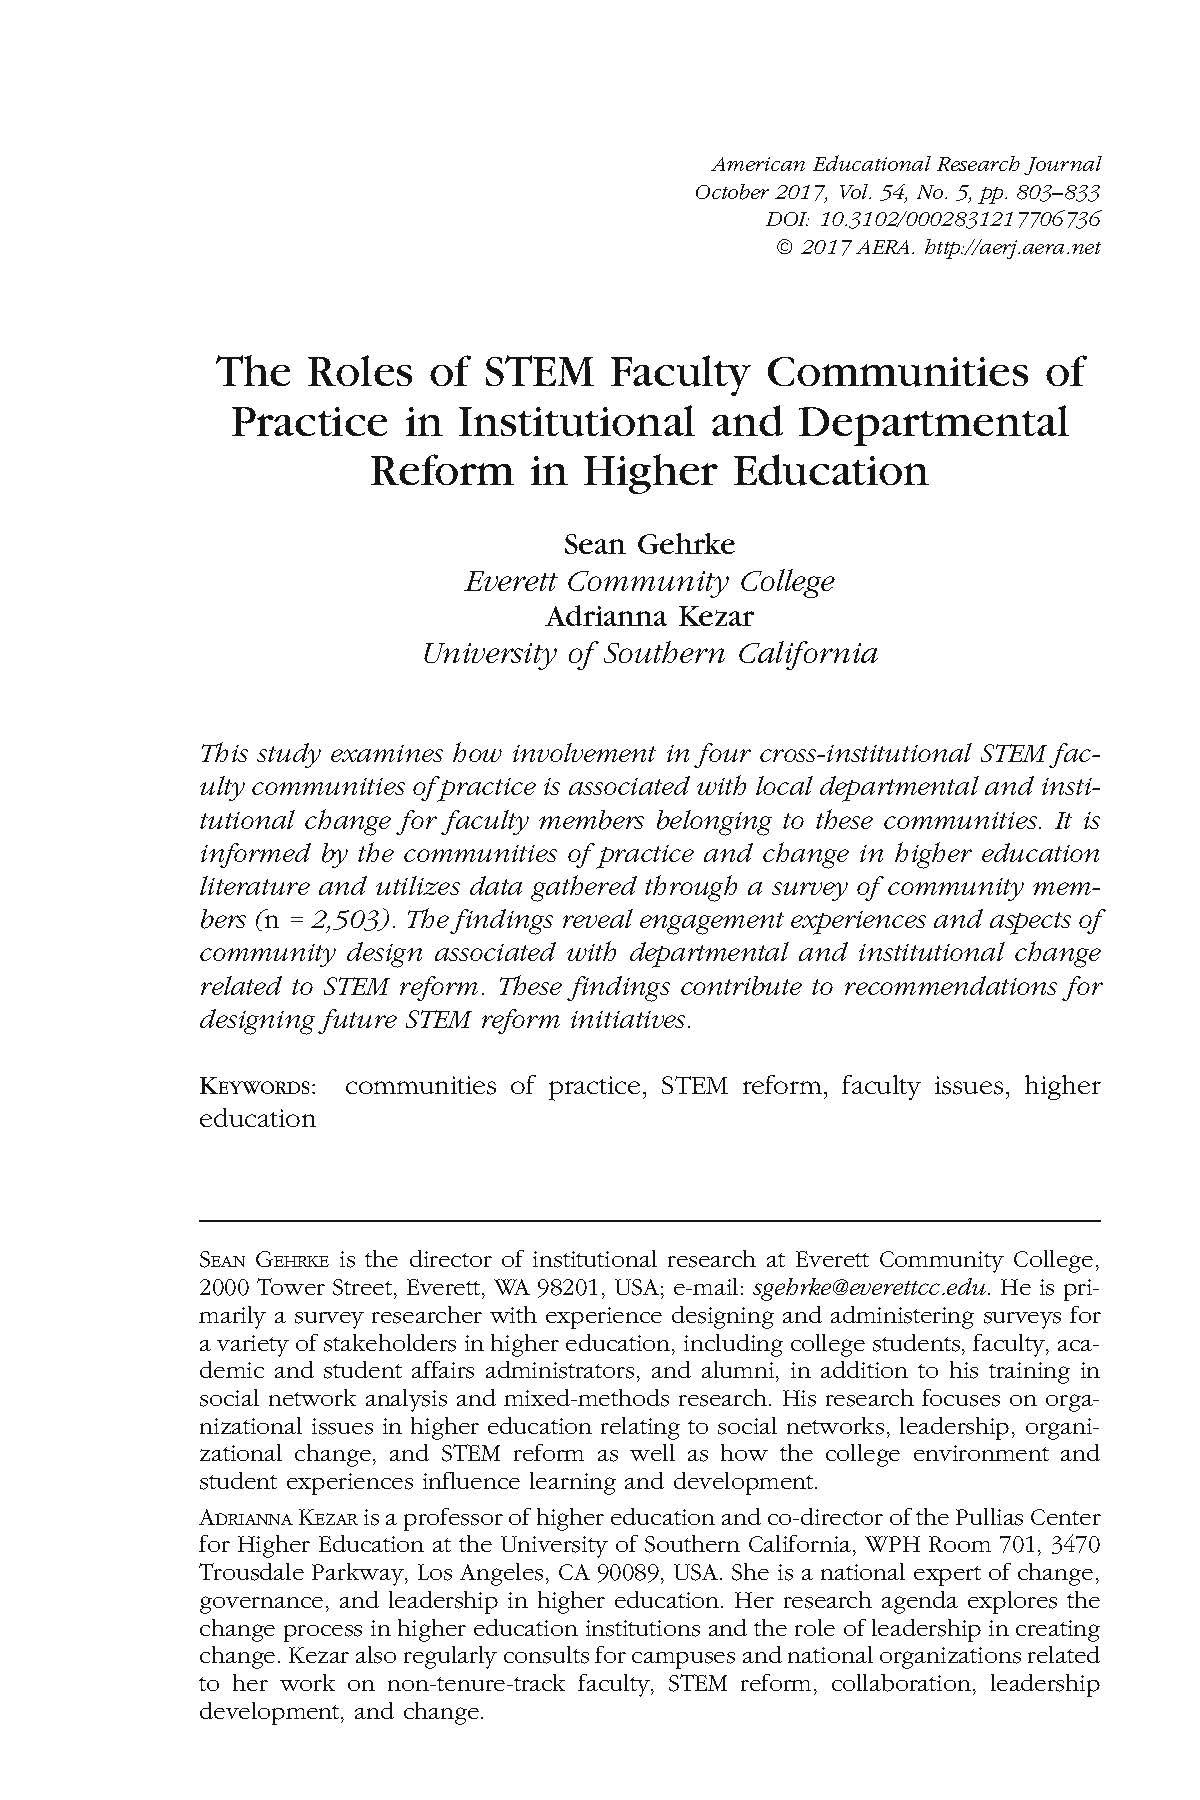 The Roles of STEM Faculty Communities of Practice in Institutional and Departmental Reform in Higher Education